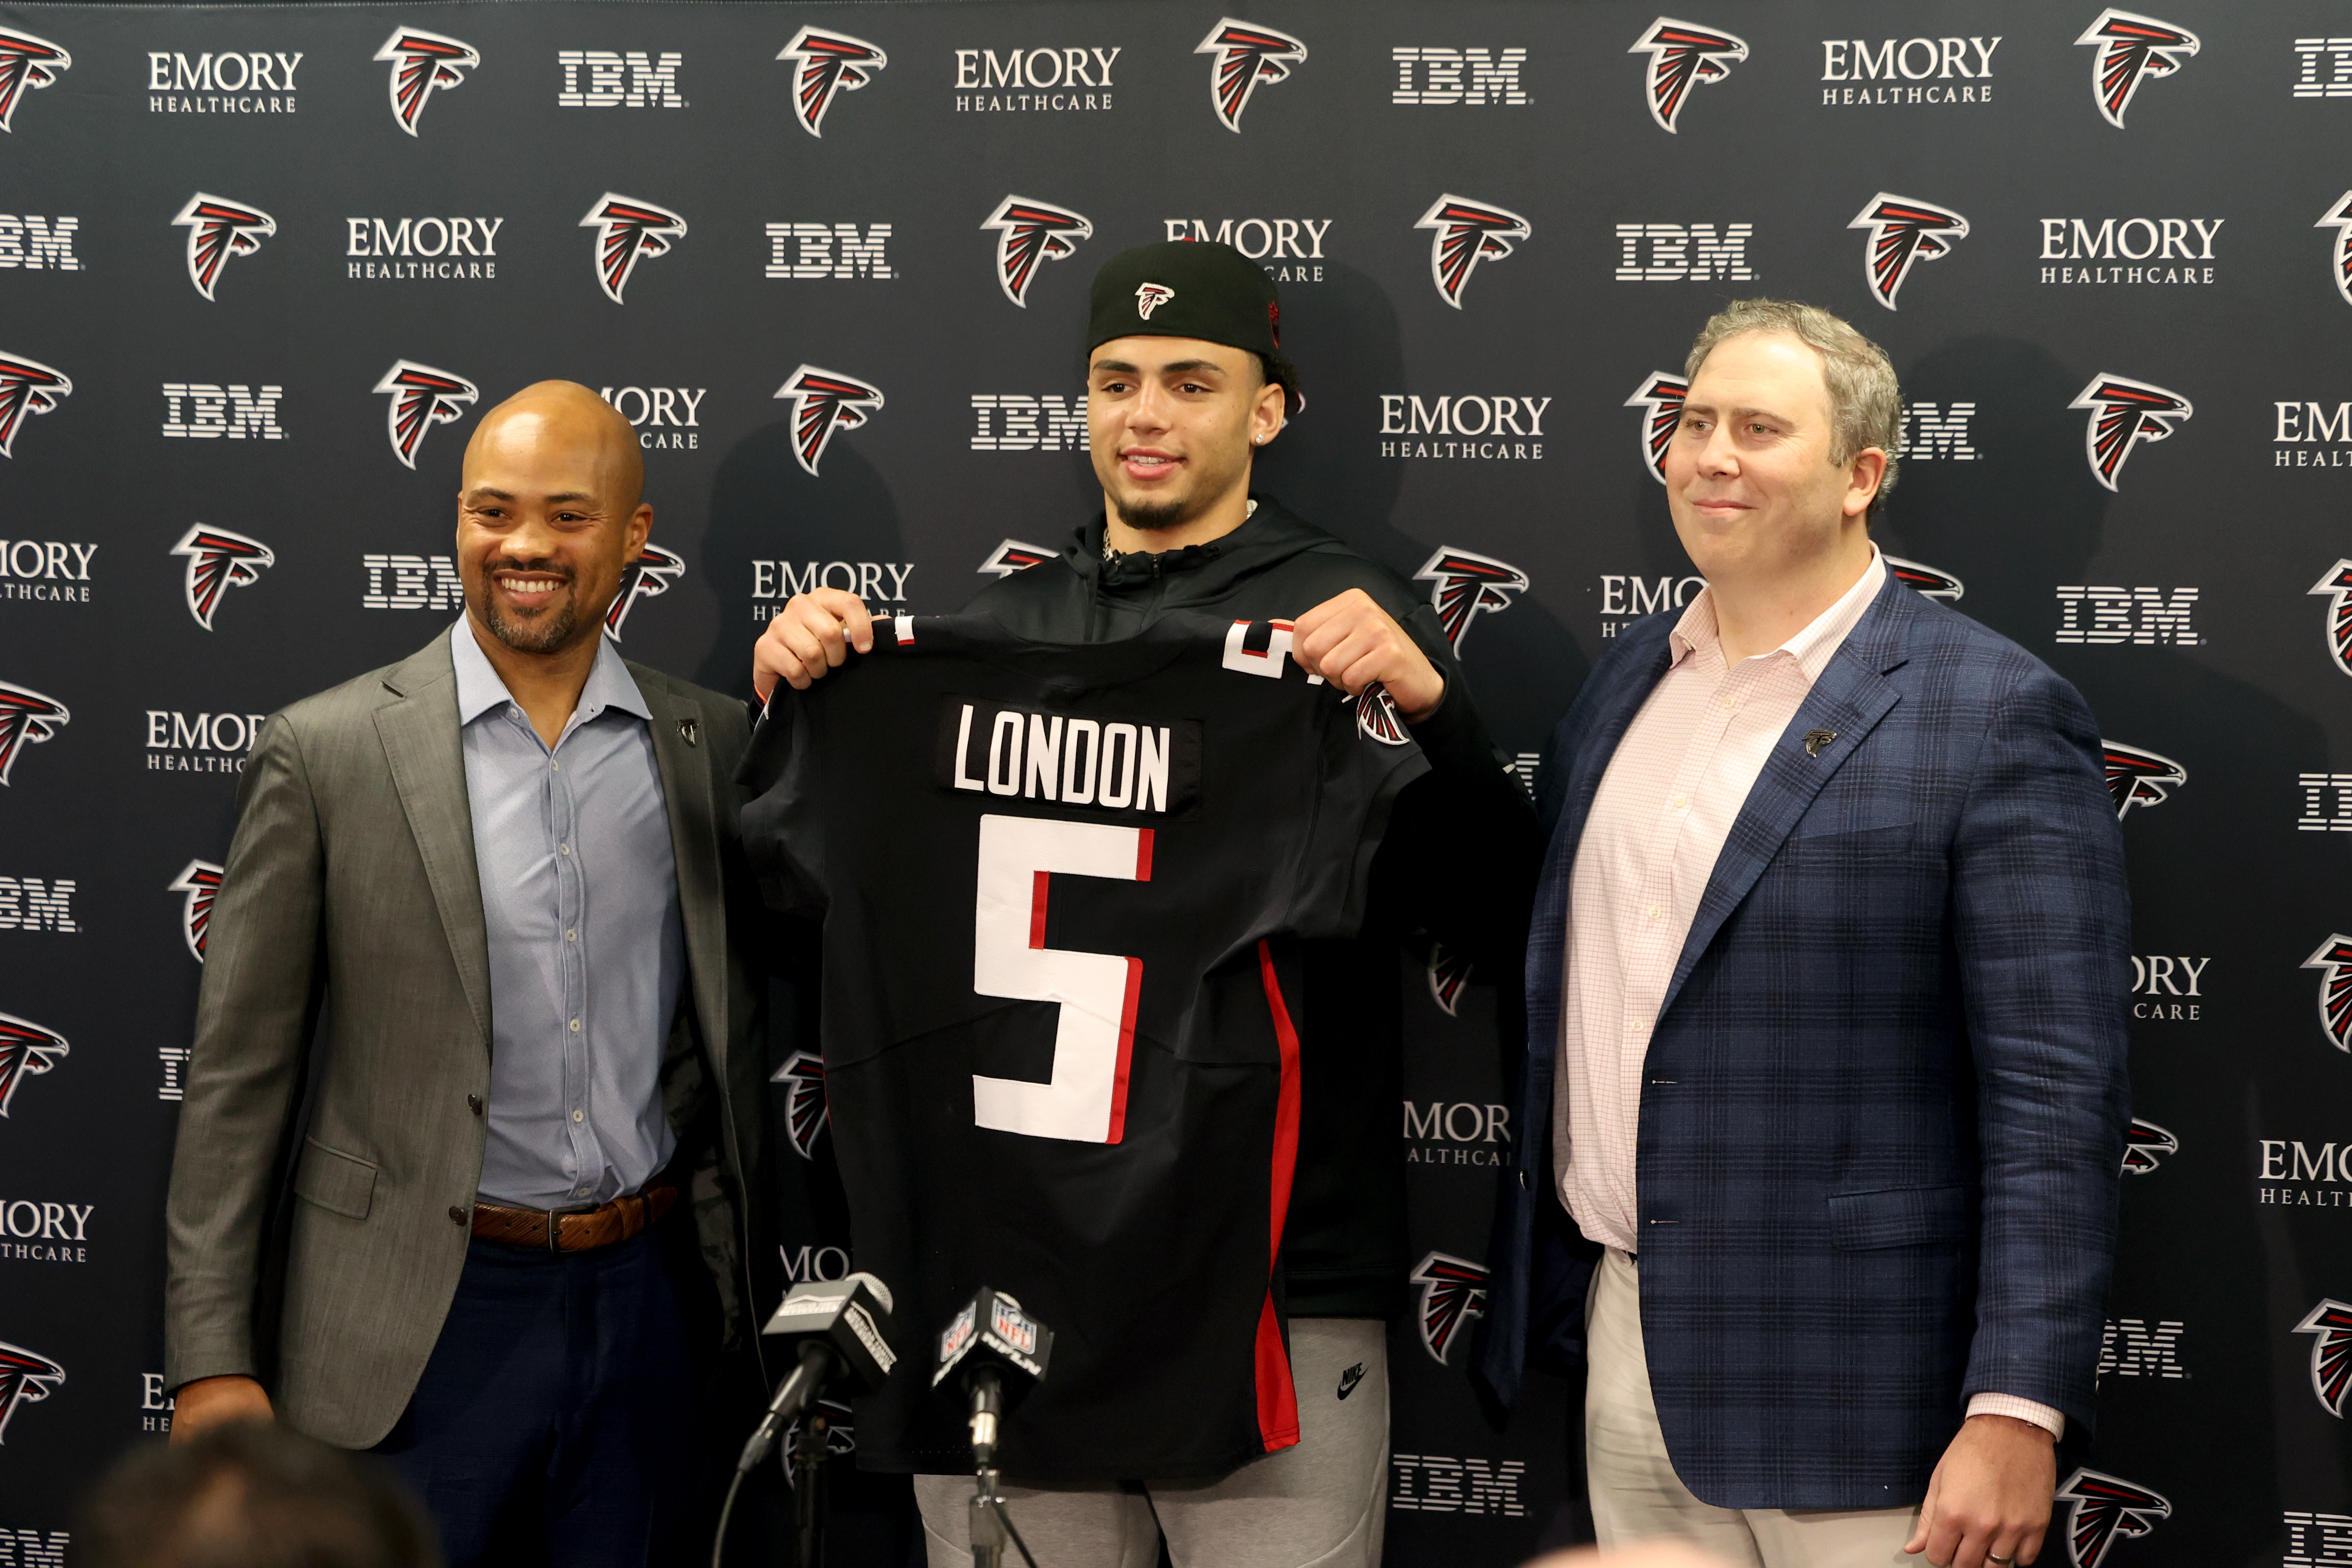 For the Falcons, playing in London 'is something that we'll